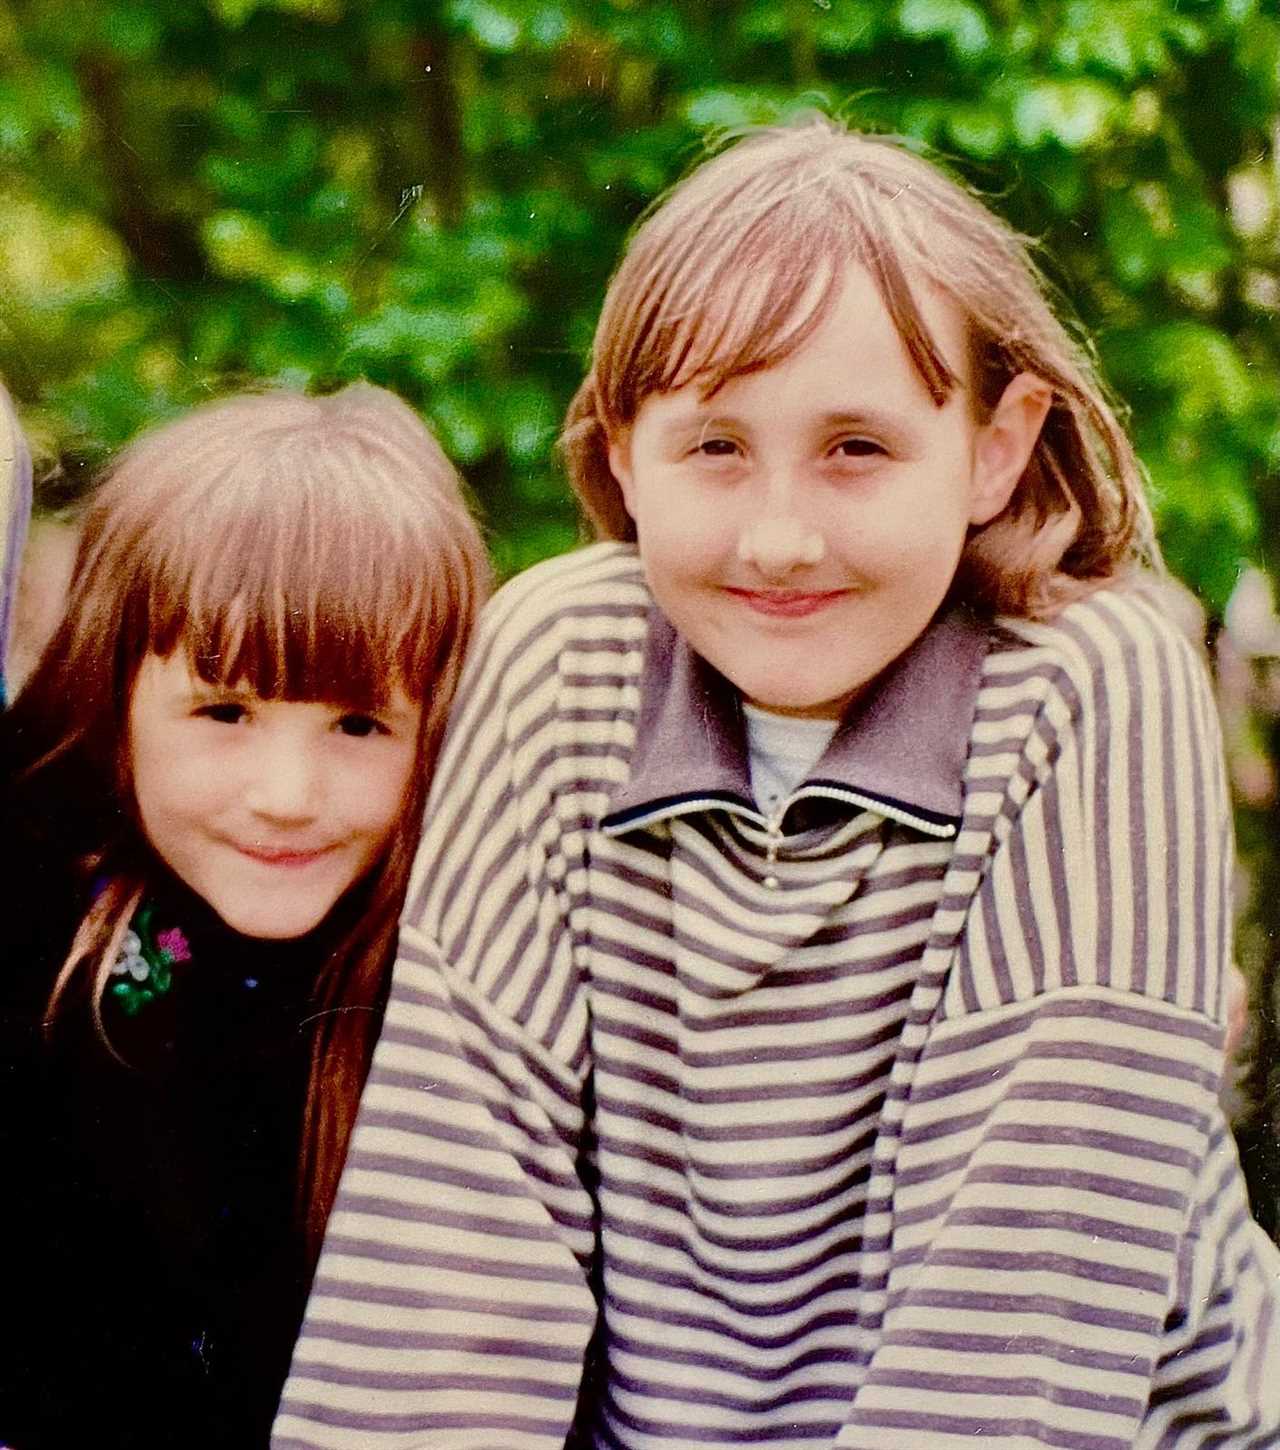 Woman shares tragic story of sister's rapid cancer death to raise awareness